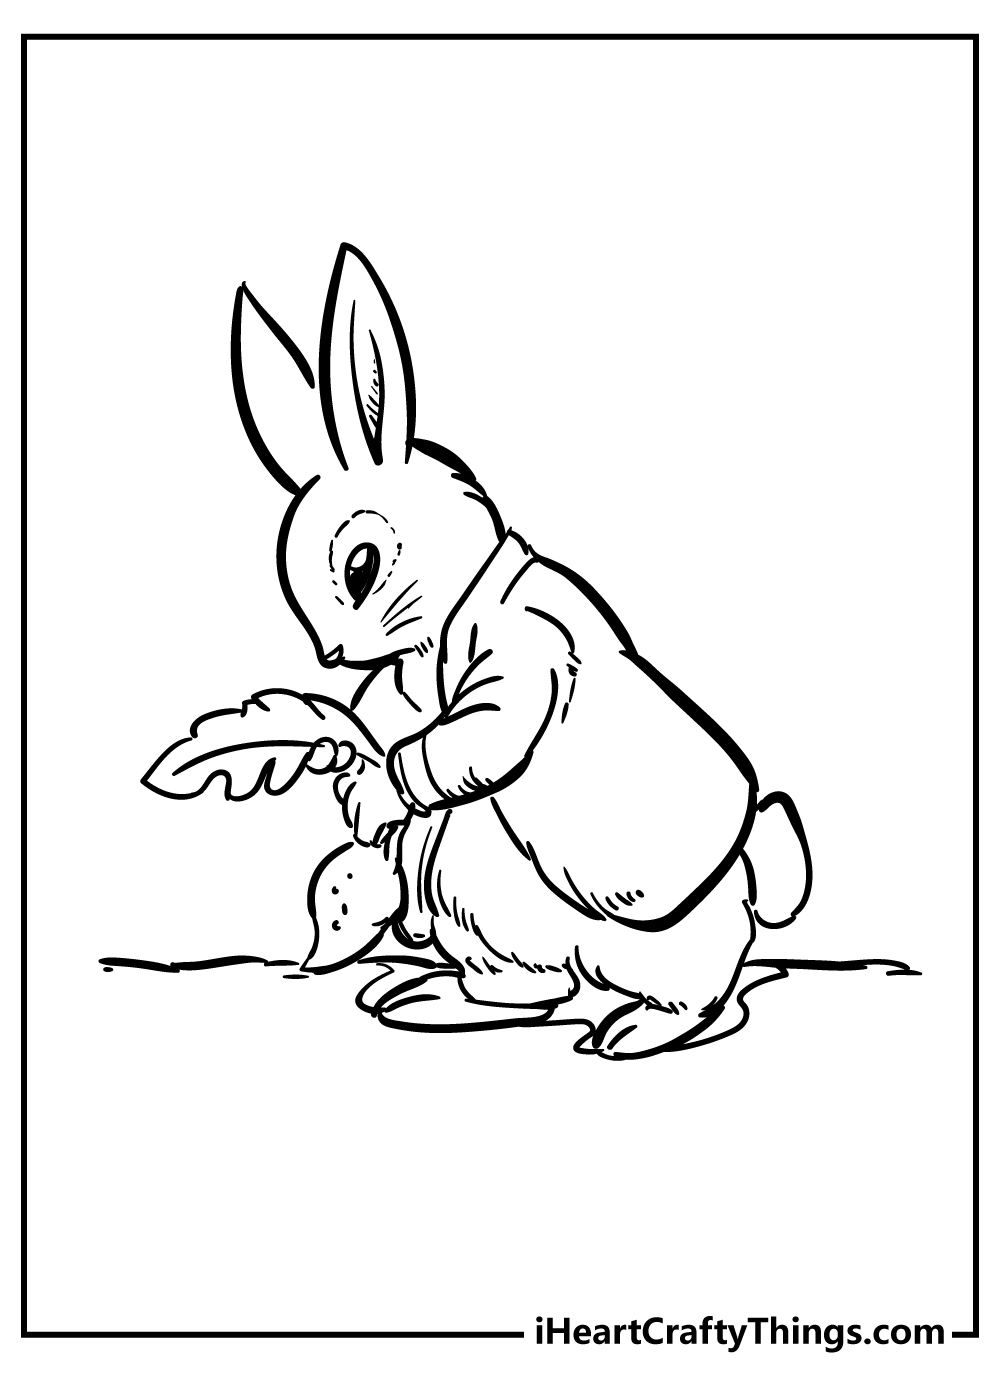 Peter Rabbit Coloring Pages (100% Free Printables) - Free Printable Peter Rabbit Images